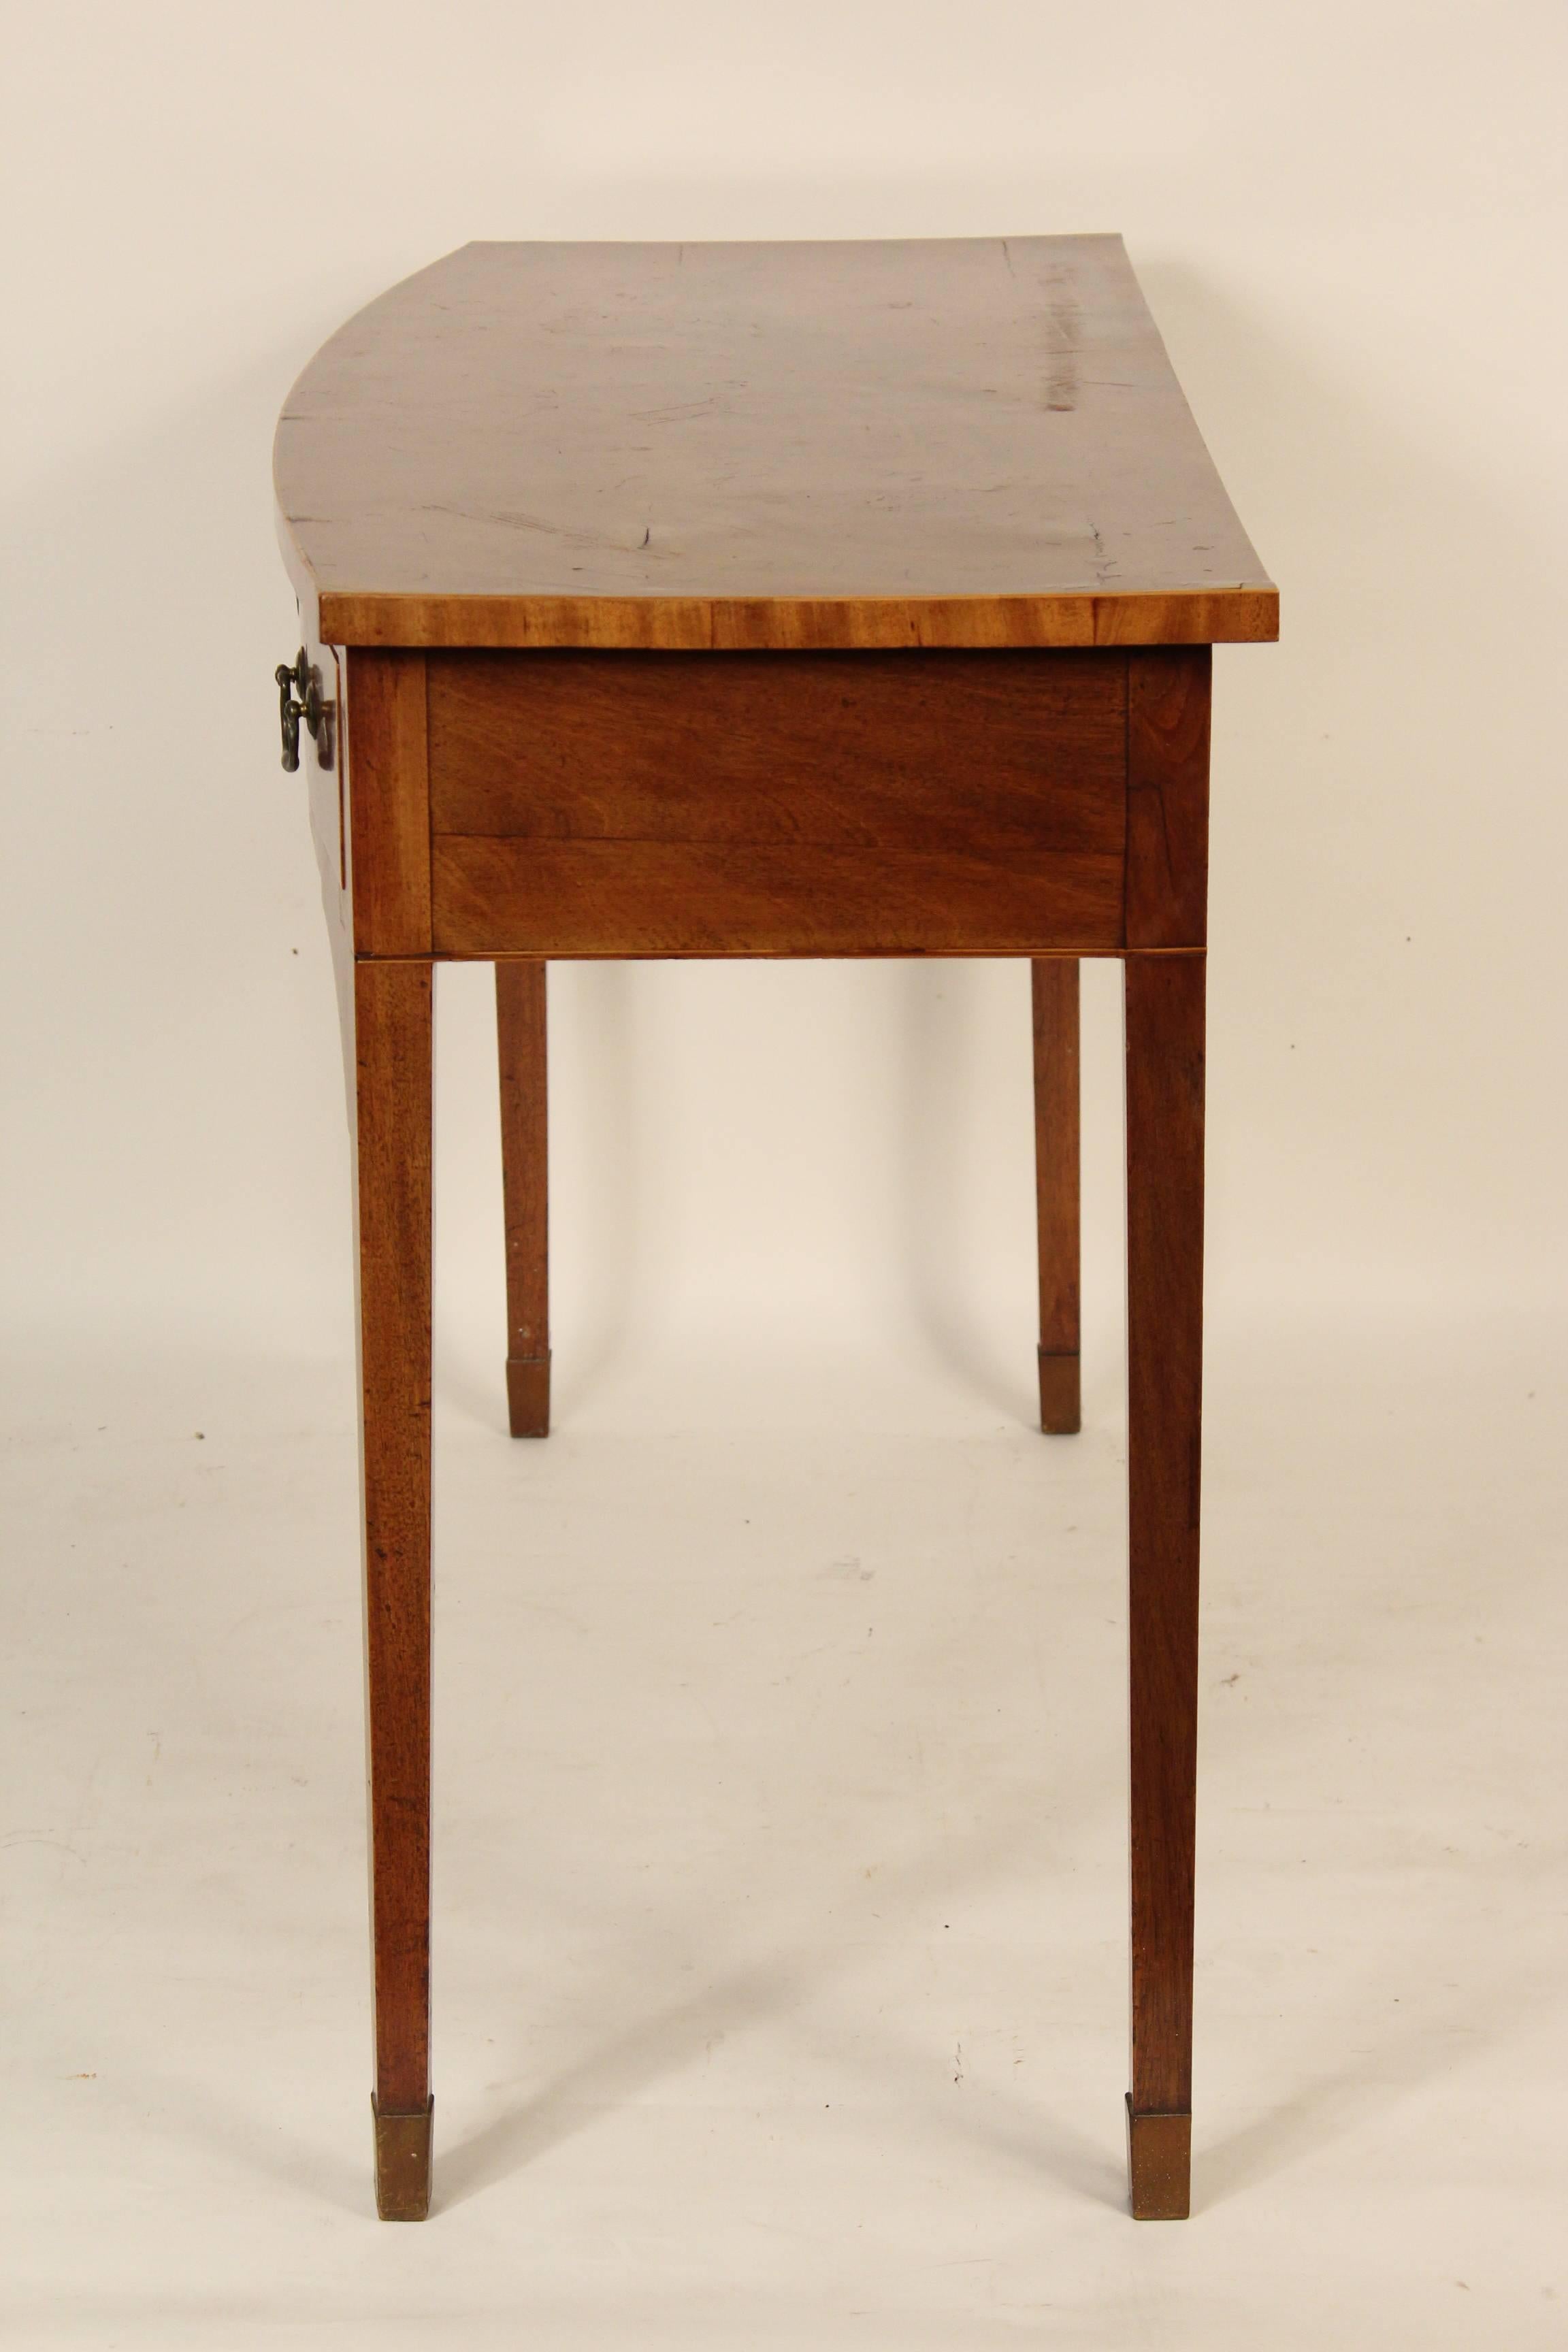 George III mahogany serving table with boxwood stringing, circa 1800. The bottom 2